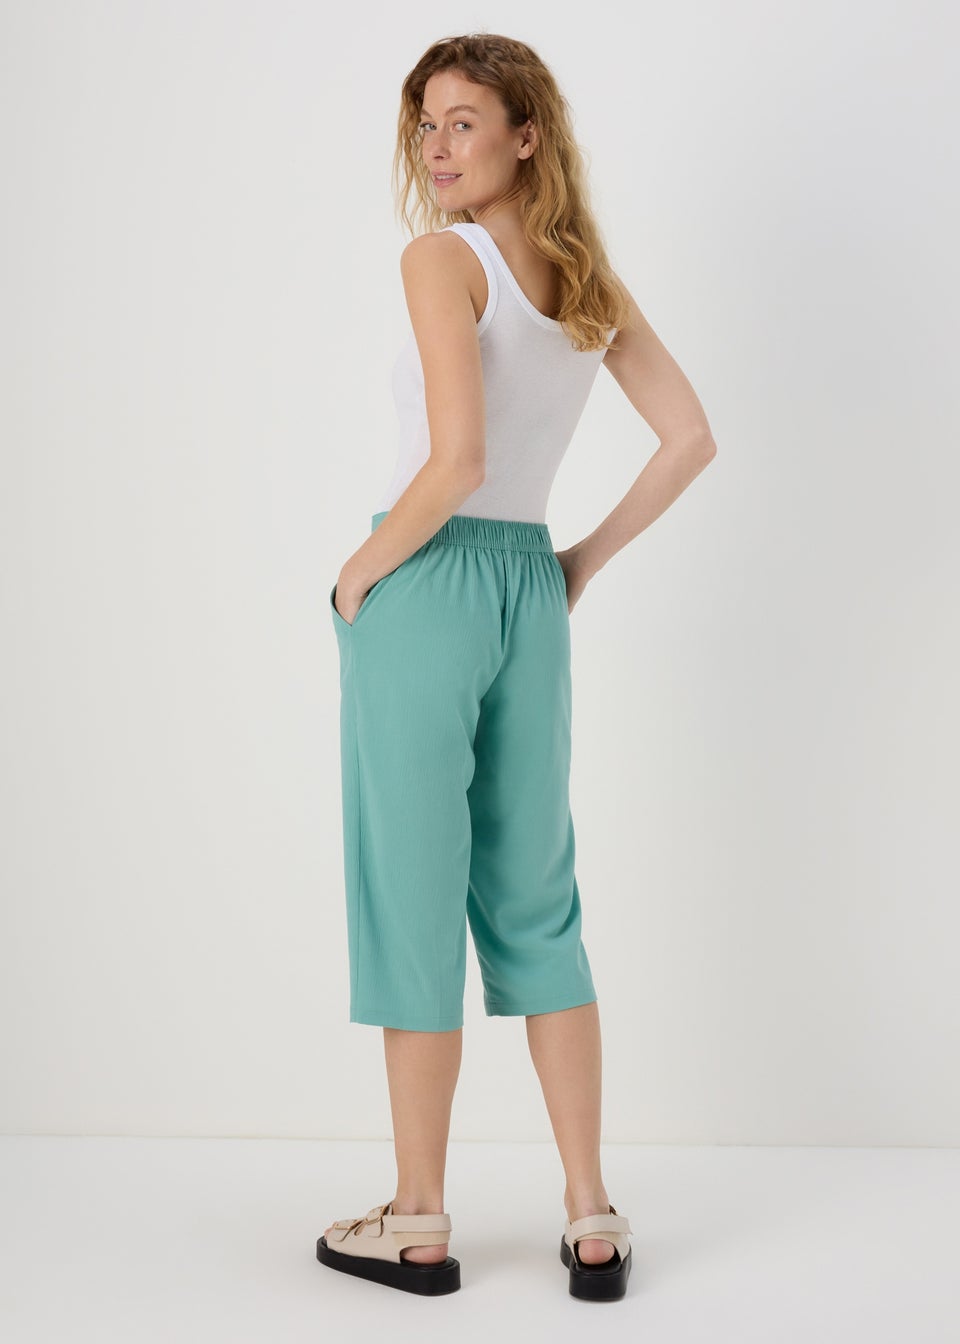 Cropped Trousers - Buy Cropped Trousers Online Starting at Just ₹220